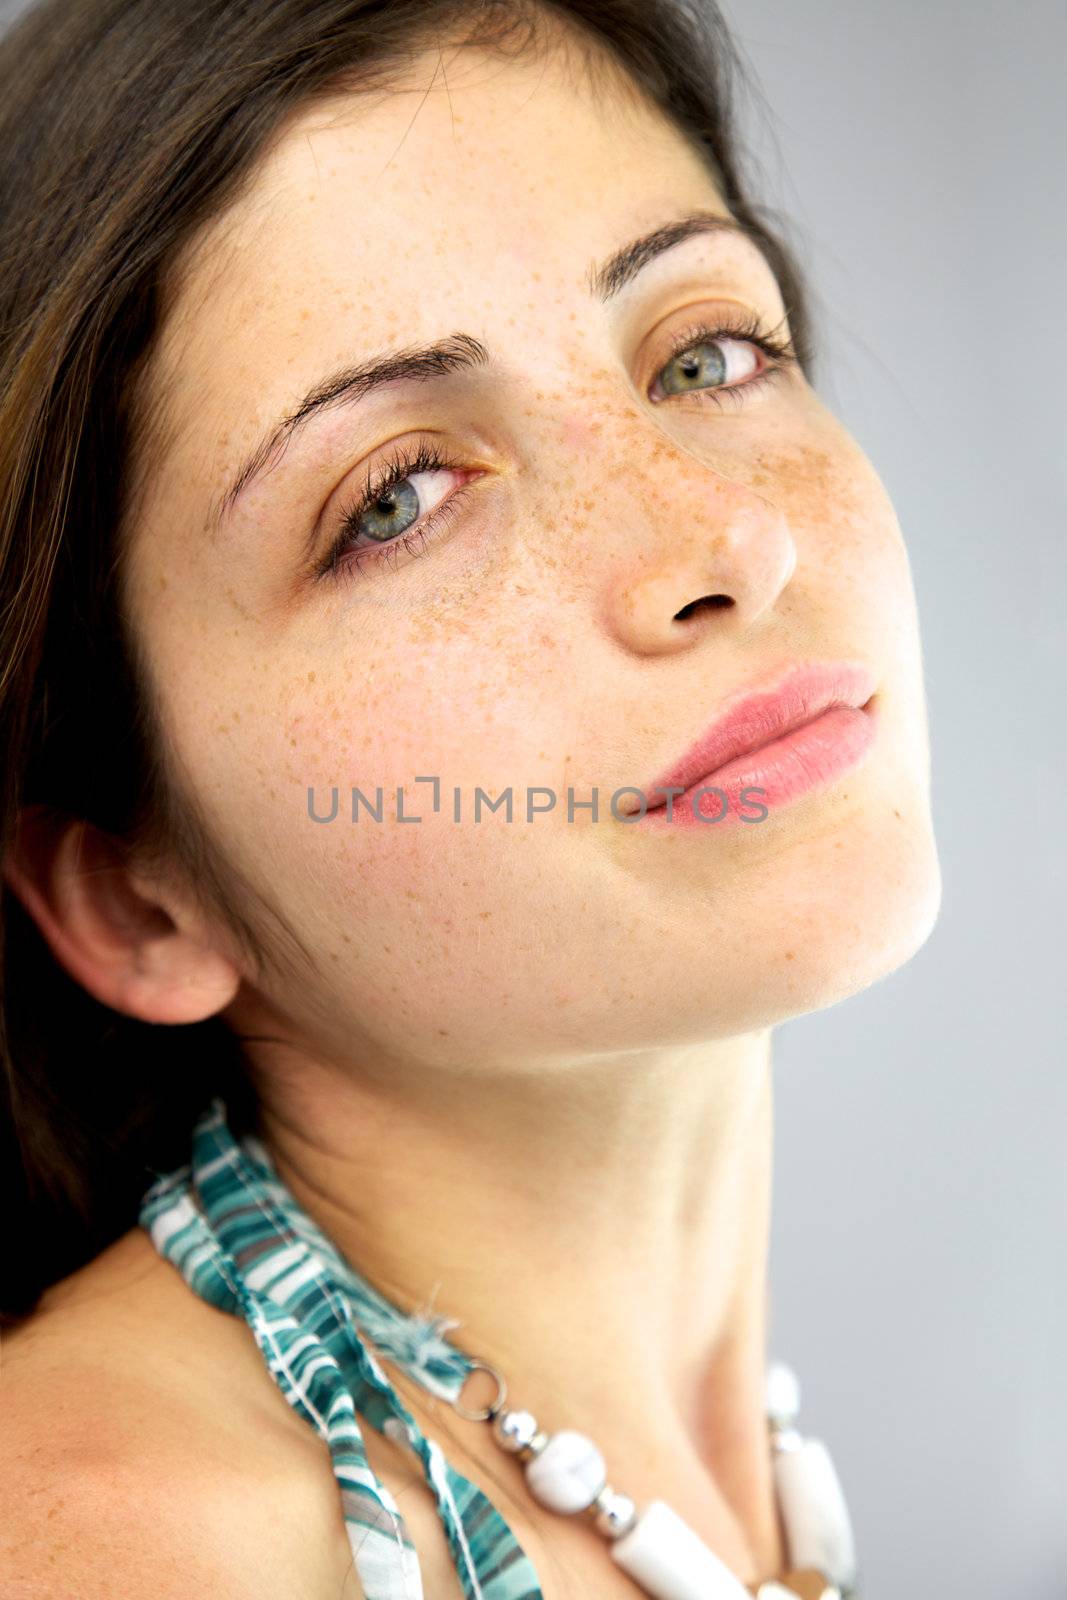 Beautiful girl with freckles and blue eyes by fmarsicano